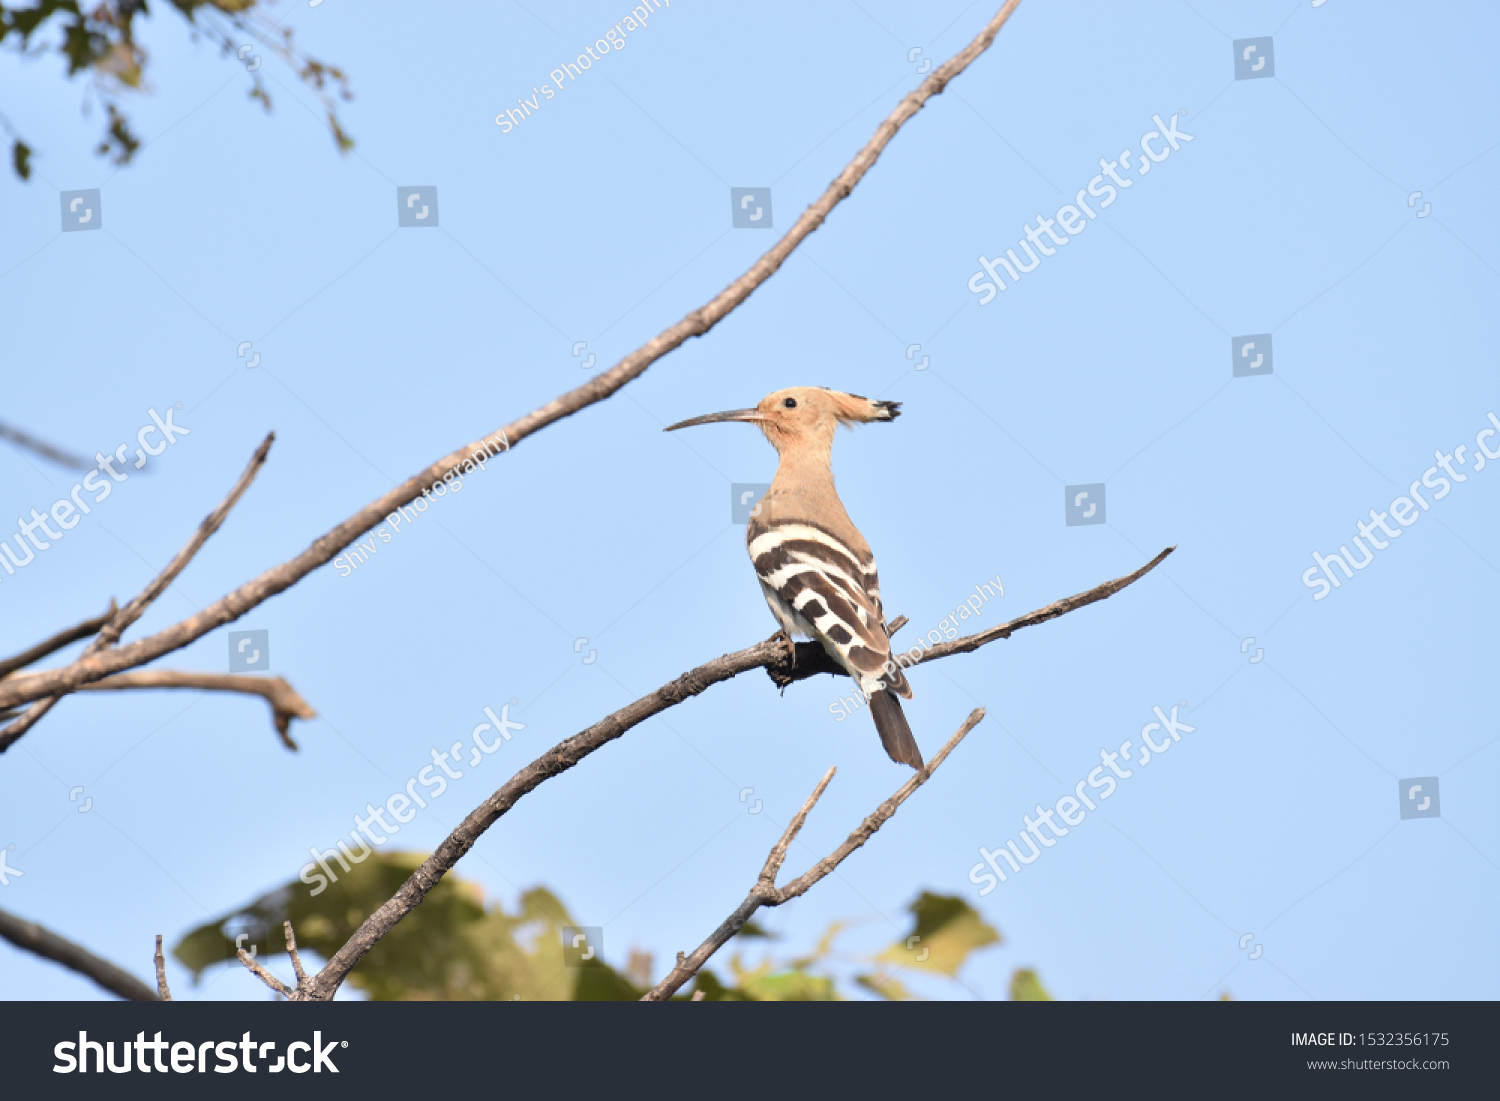 Crown feathered, brown upper part with black and white stripes on the feathers Eurasian Hoopoe bird (Upupa Epops) perching on branch sighted at Panna National Park, Madhya Pradesh, India, Asia #1532356175